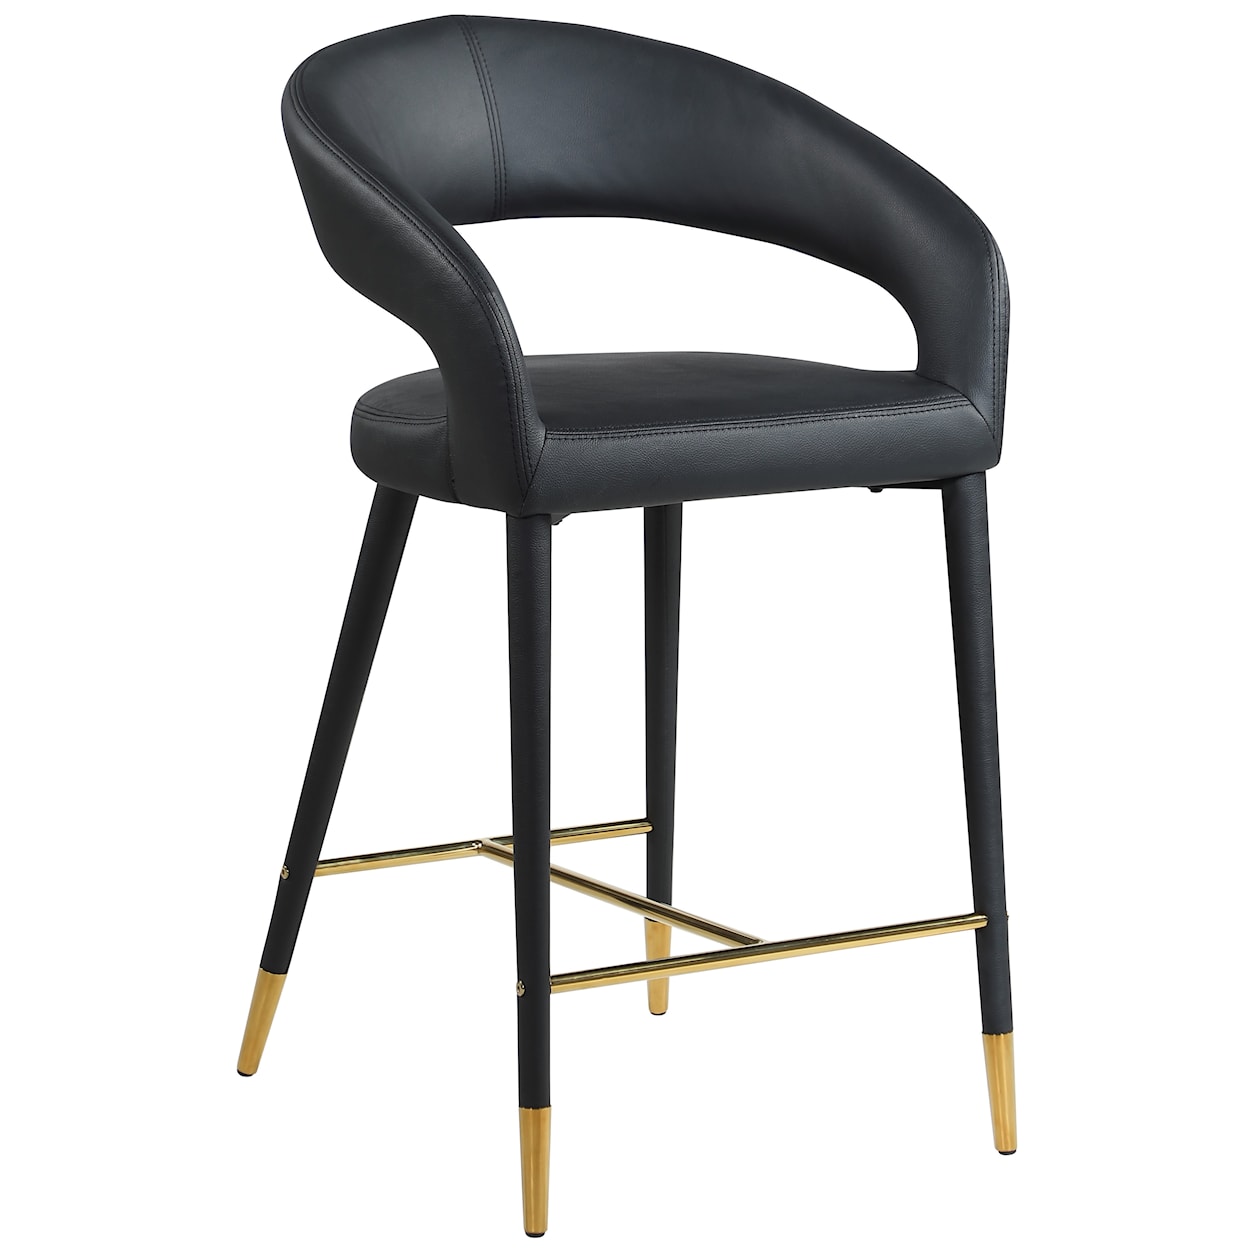 Meridian Furniture Destiny Upholstered Black Faux Leather Counter Stool